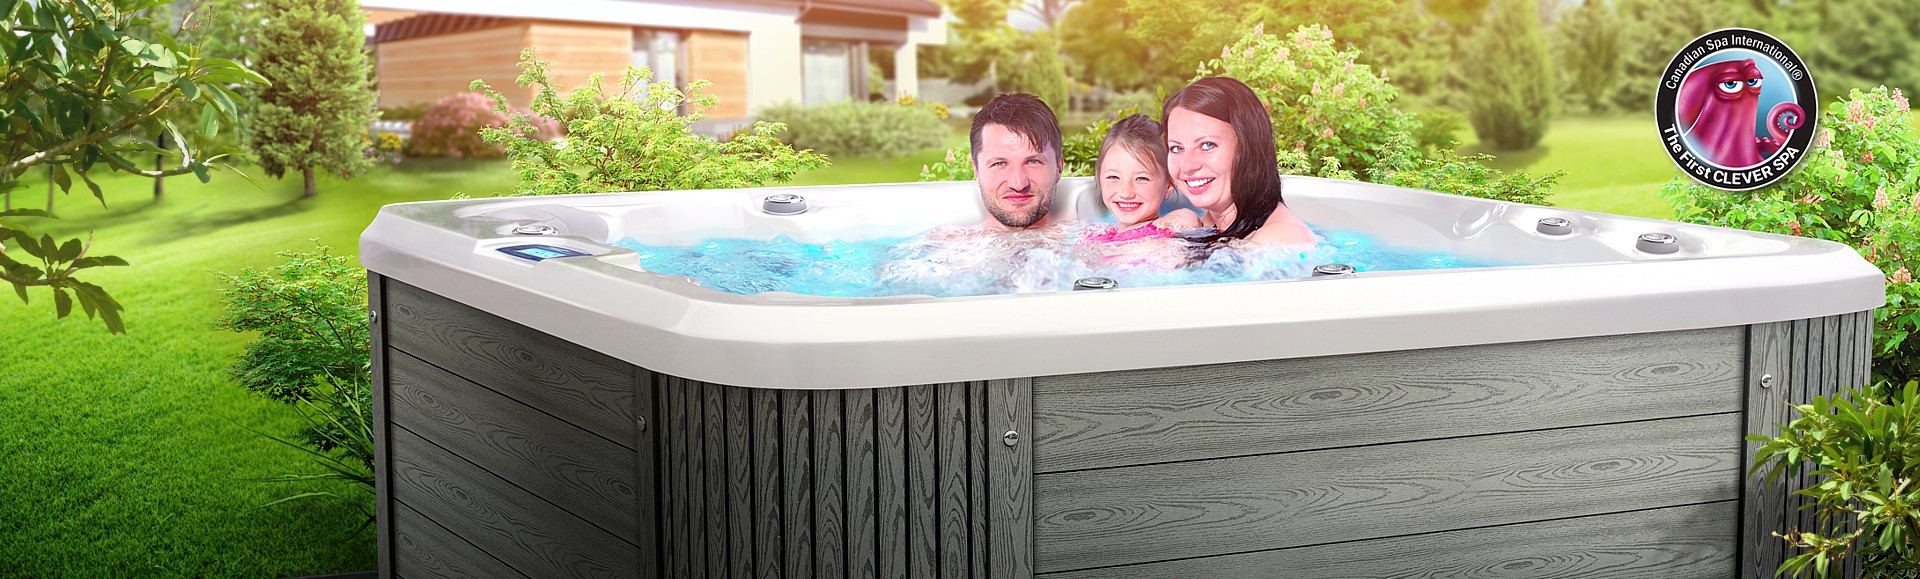 Family hot tub Nemo by Canadian Spa International® - outdoor whirlpool for year-round operation